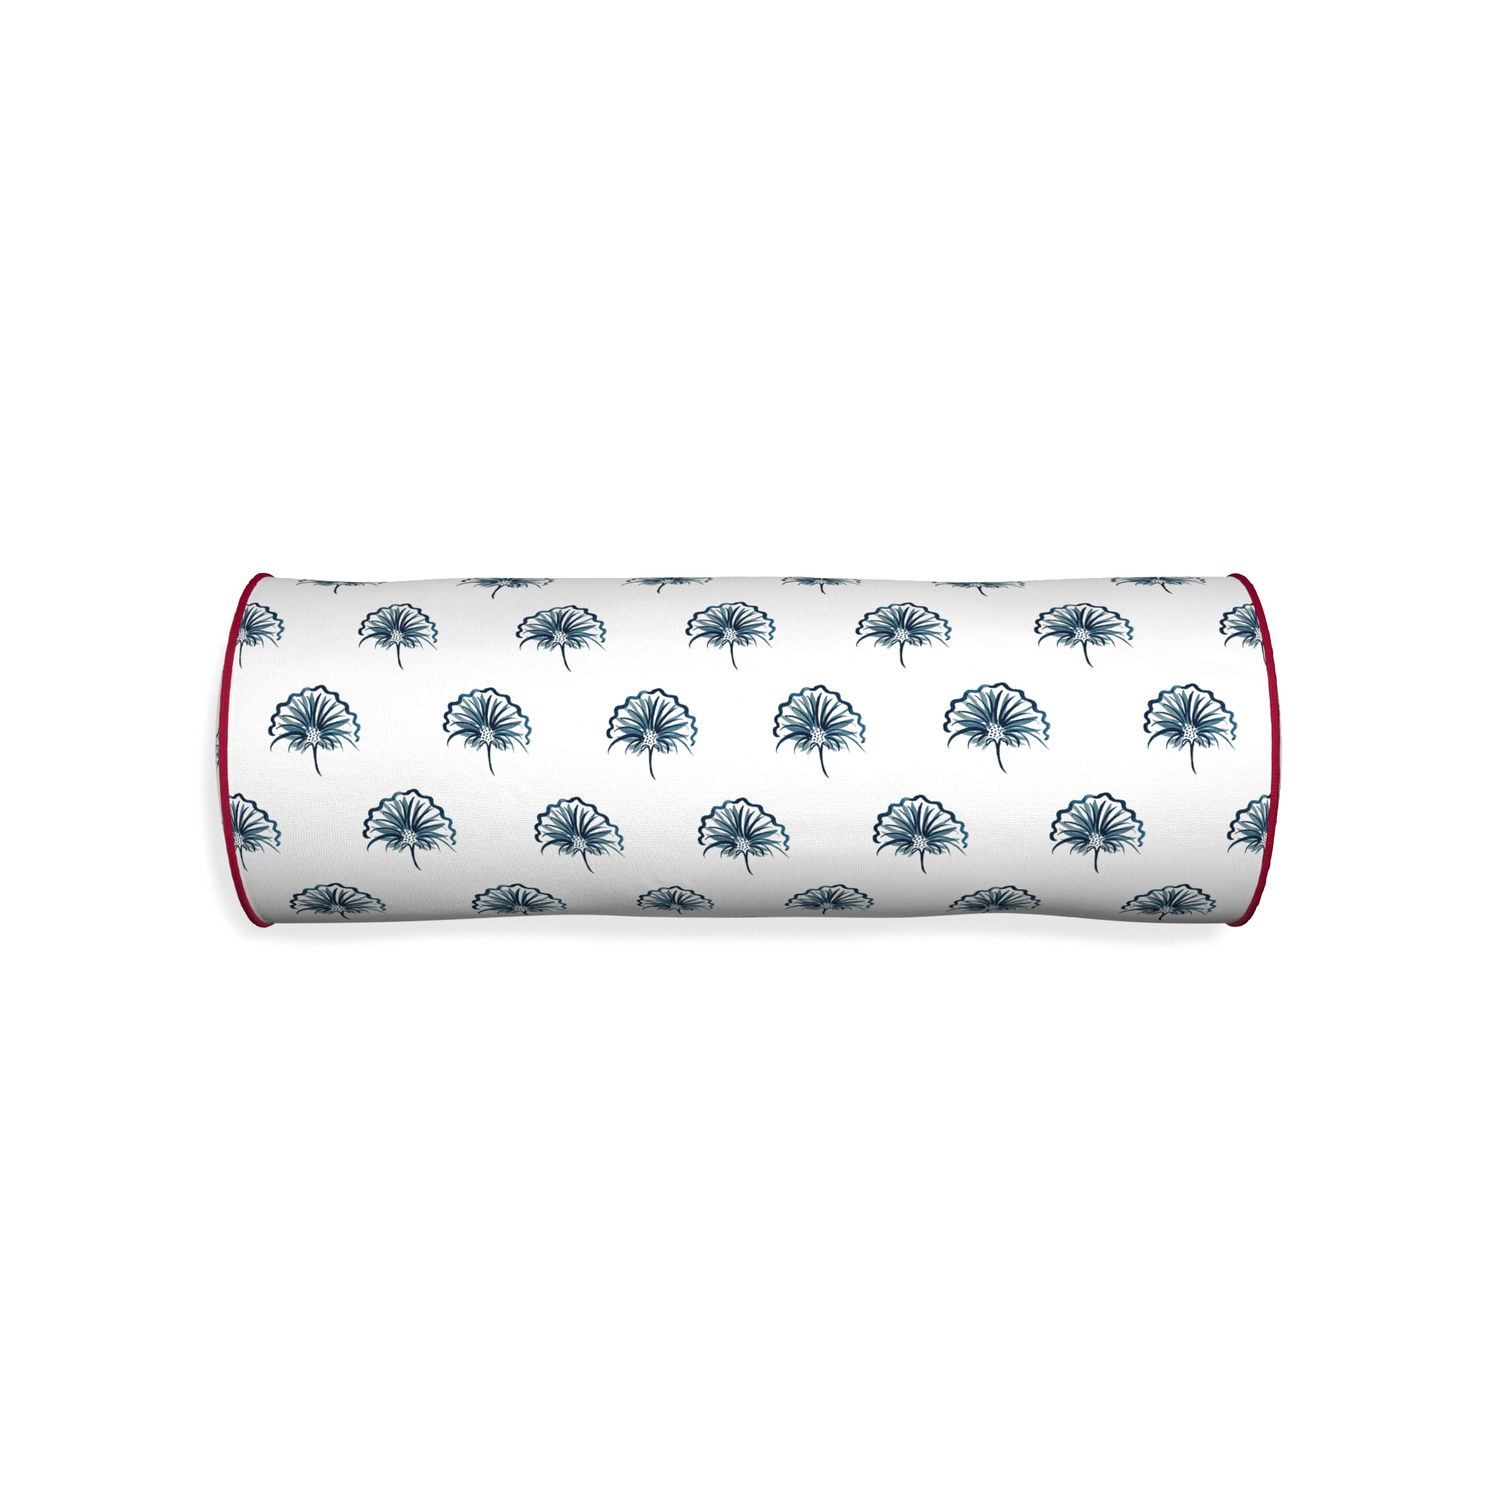 Bolster penelope midnight custom floral navypillow with raspberry piping on white background